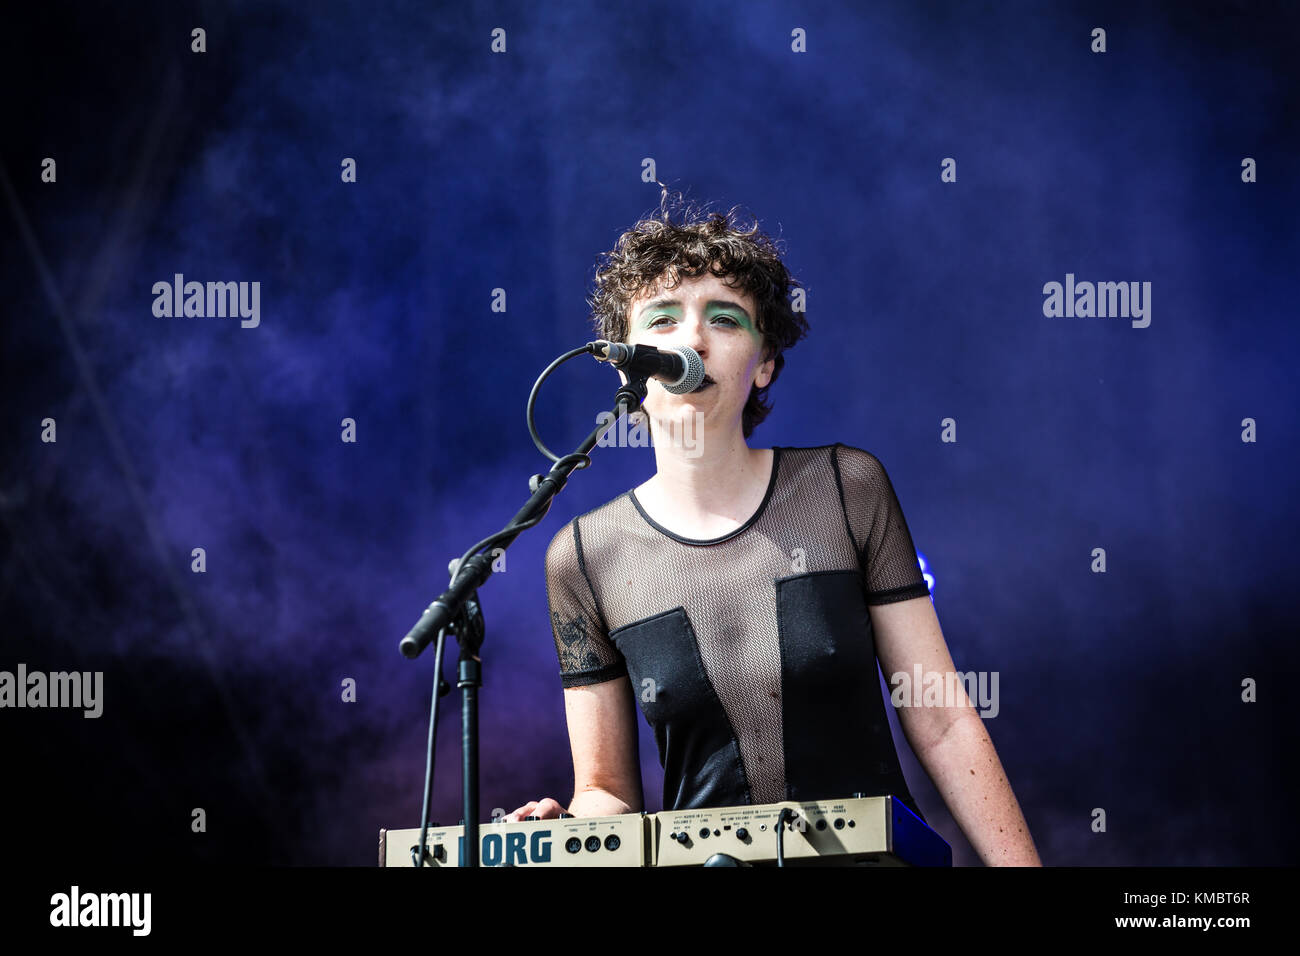 The German indie pop band Schnipo Schranke performs a live concert at the German  music festival Open Source Festival 2016 in Düsseldorf. The band consists  of the two musicians and singers Daniela